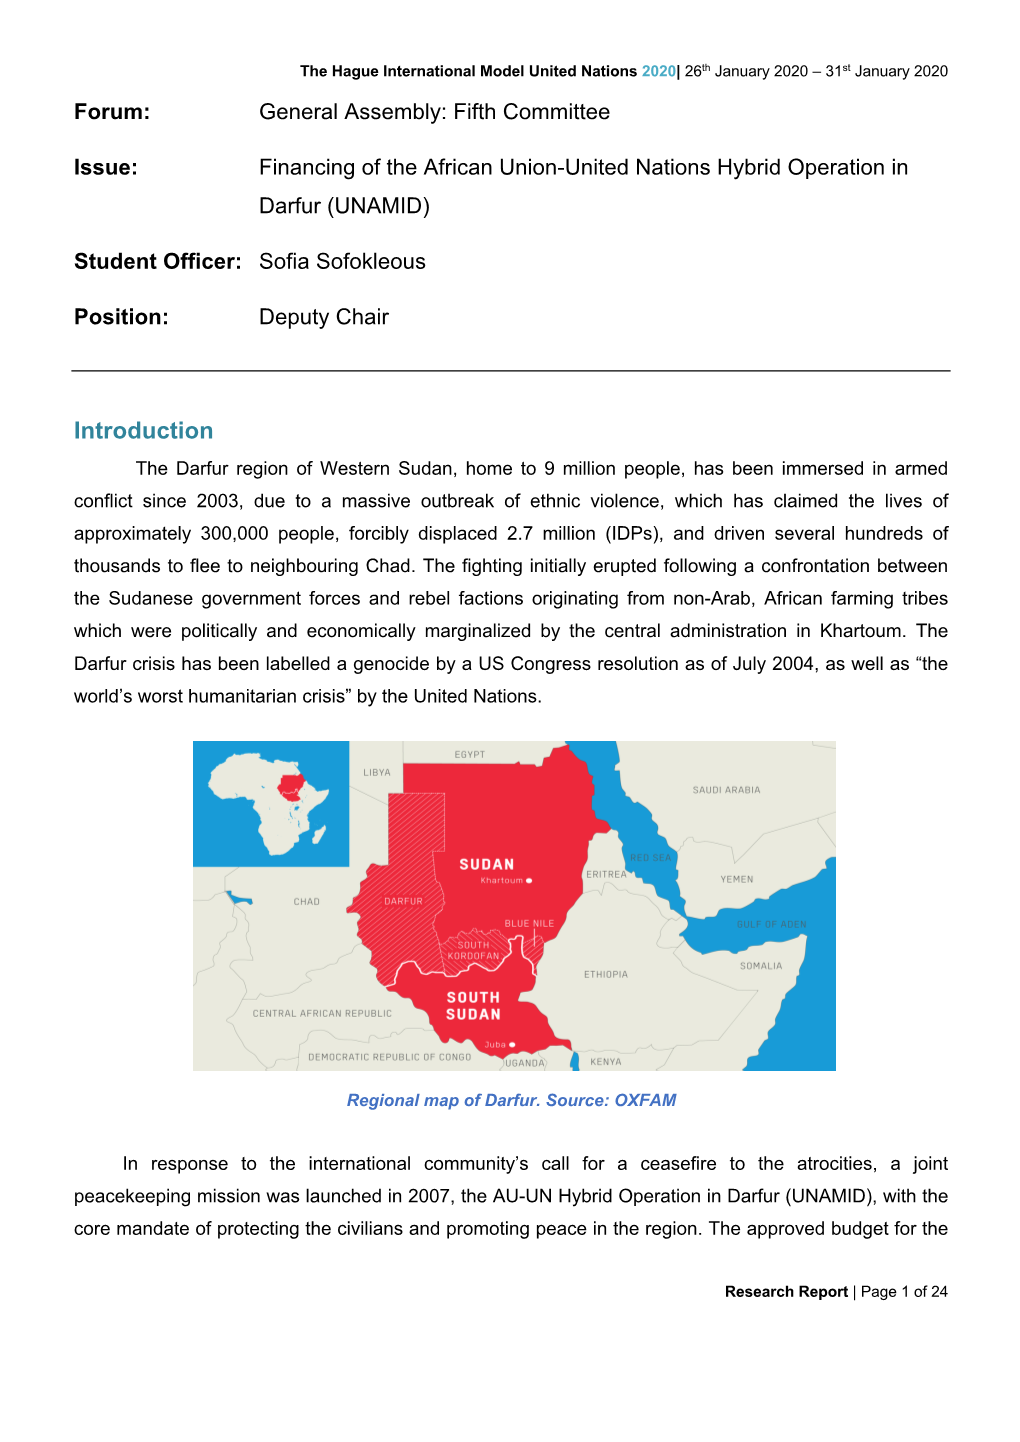 Financing of the African Union-United Nations Hybrid Operation in Darfur (UNAMID)